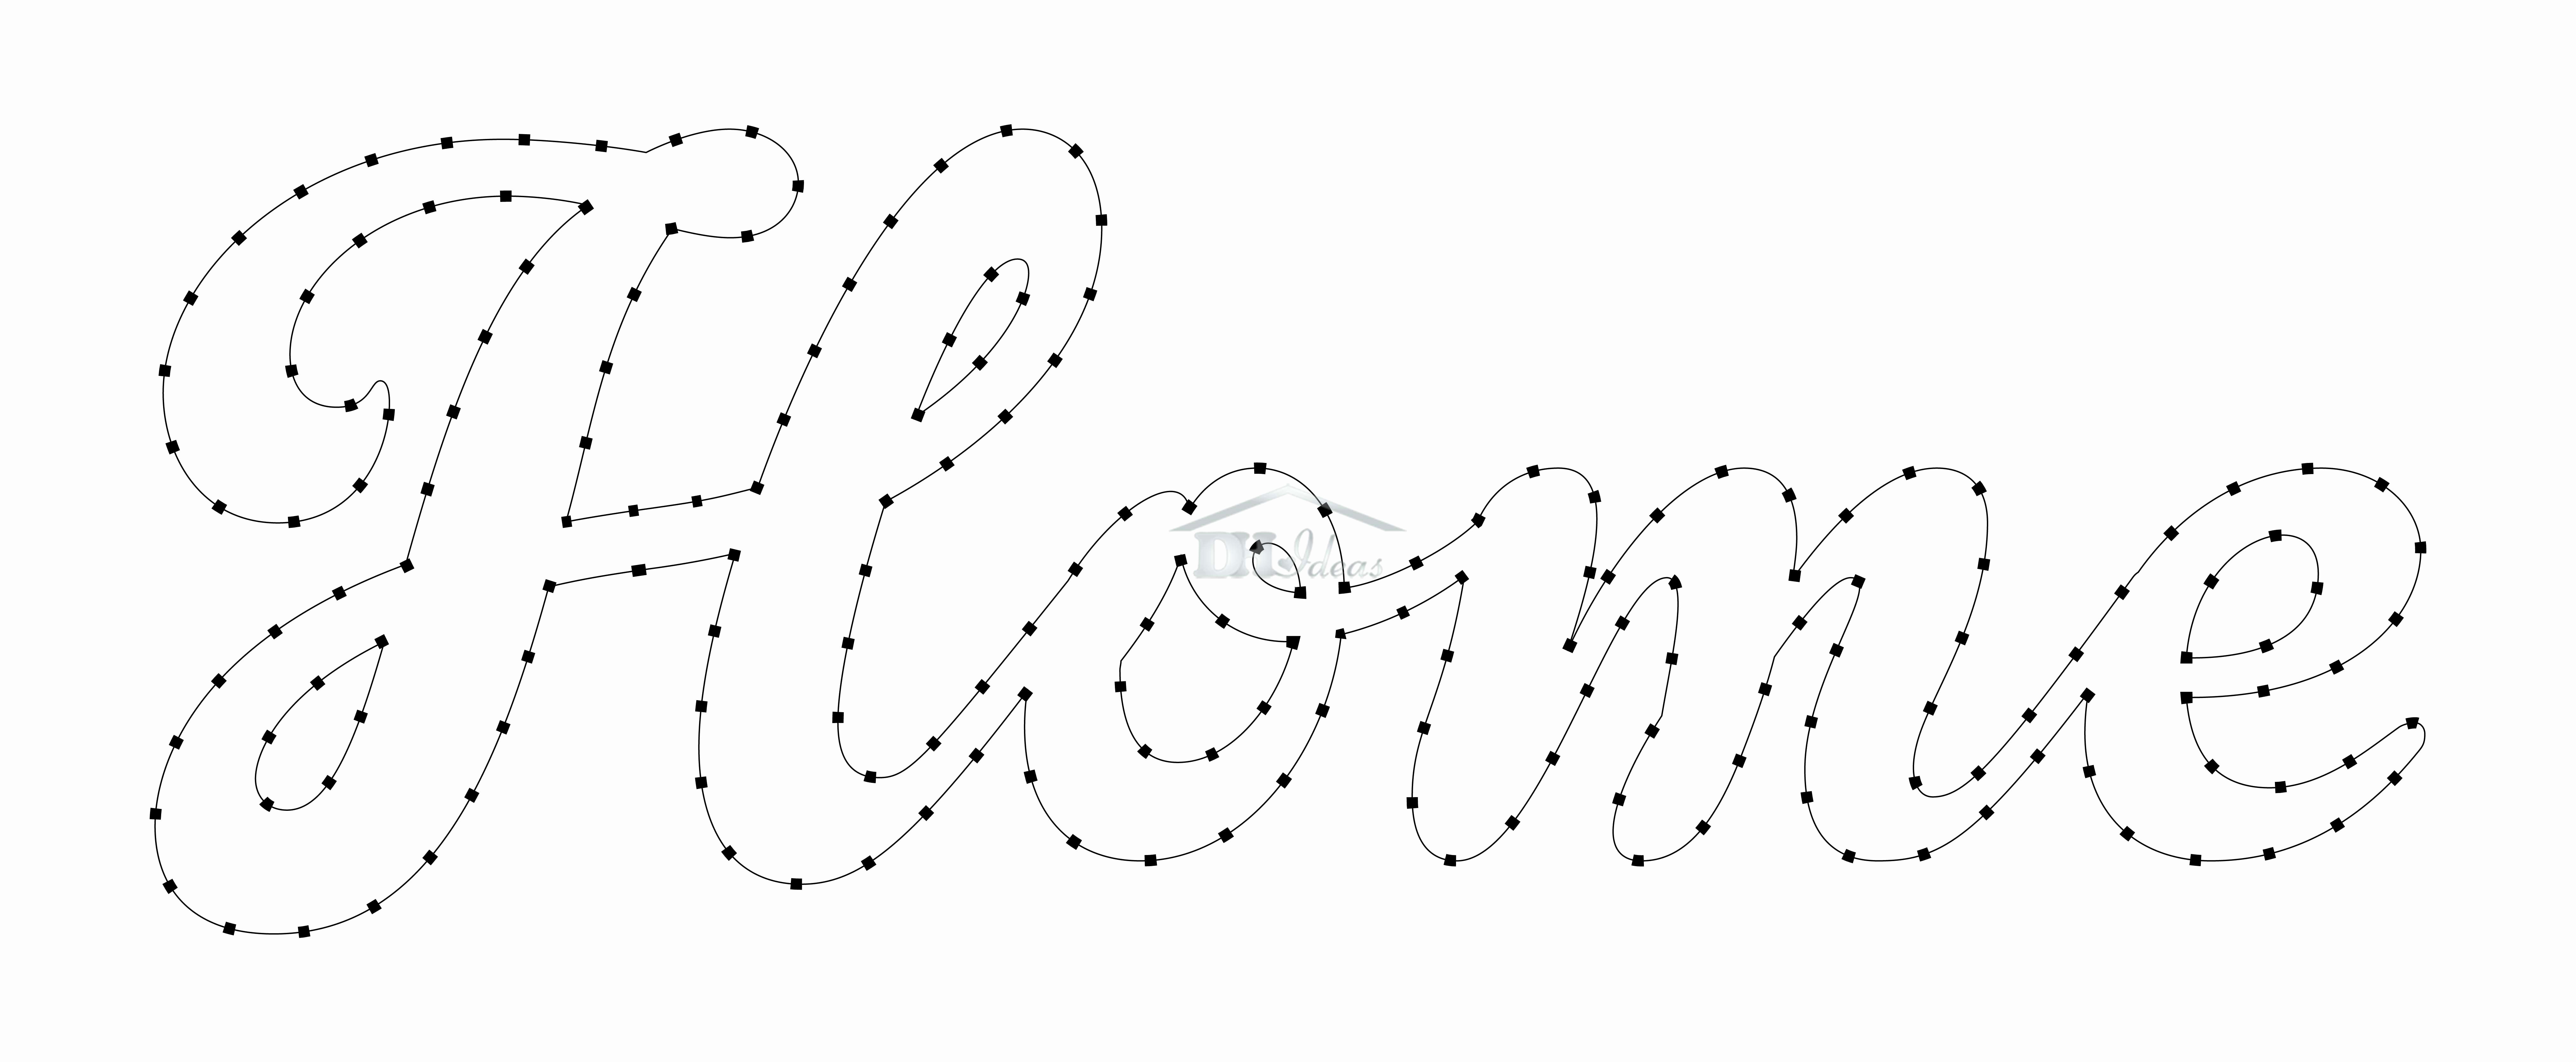 Free Word Art Template New 30 Free Printable String Art Patterns Direct Download